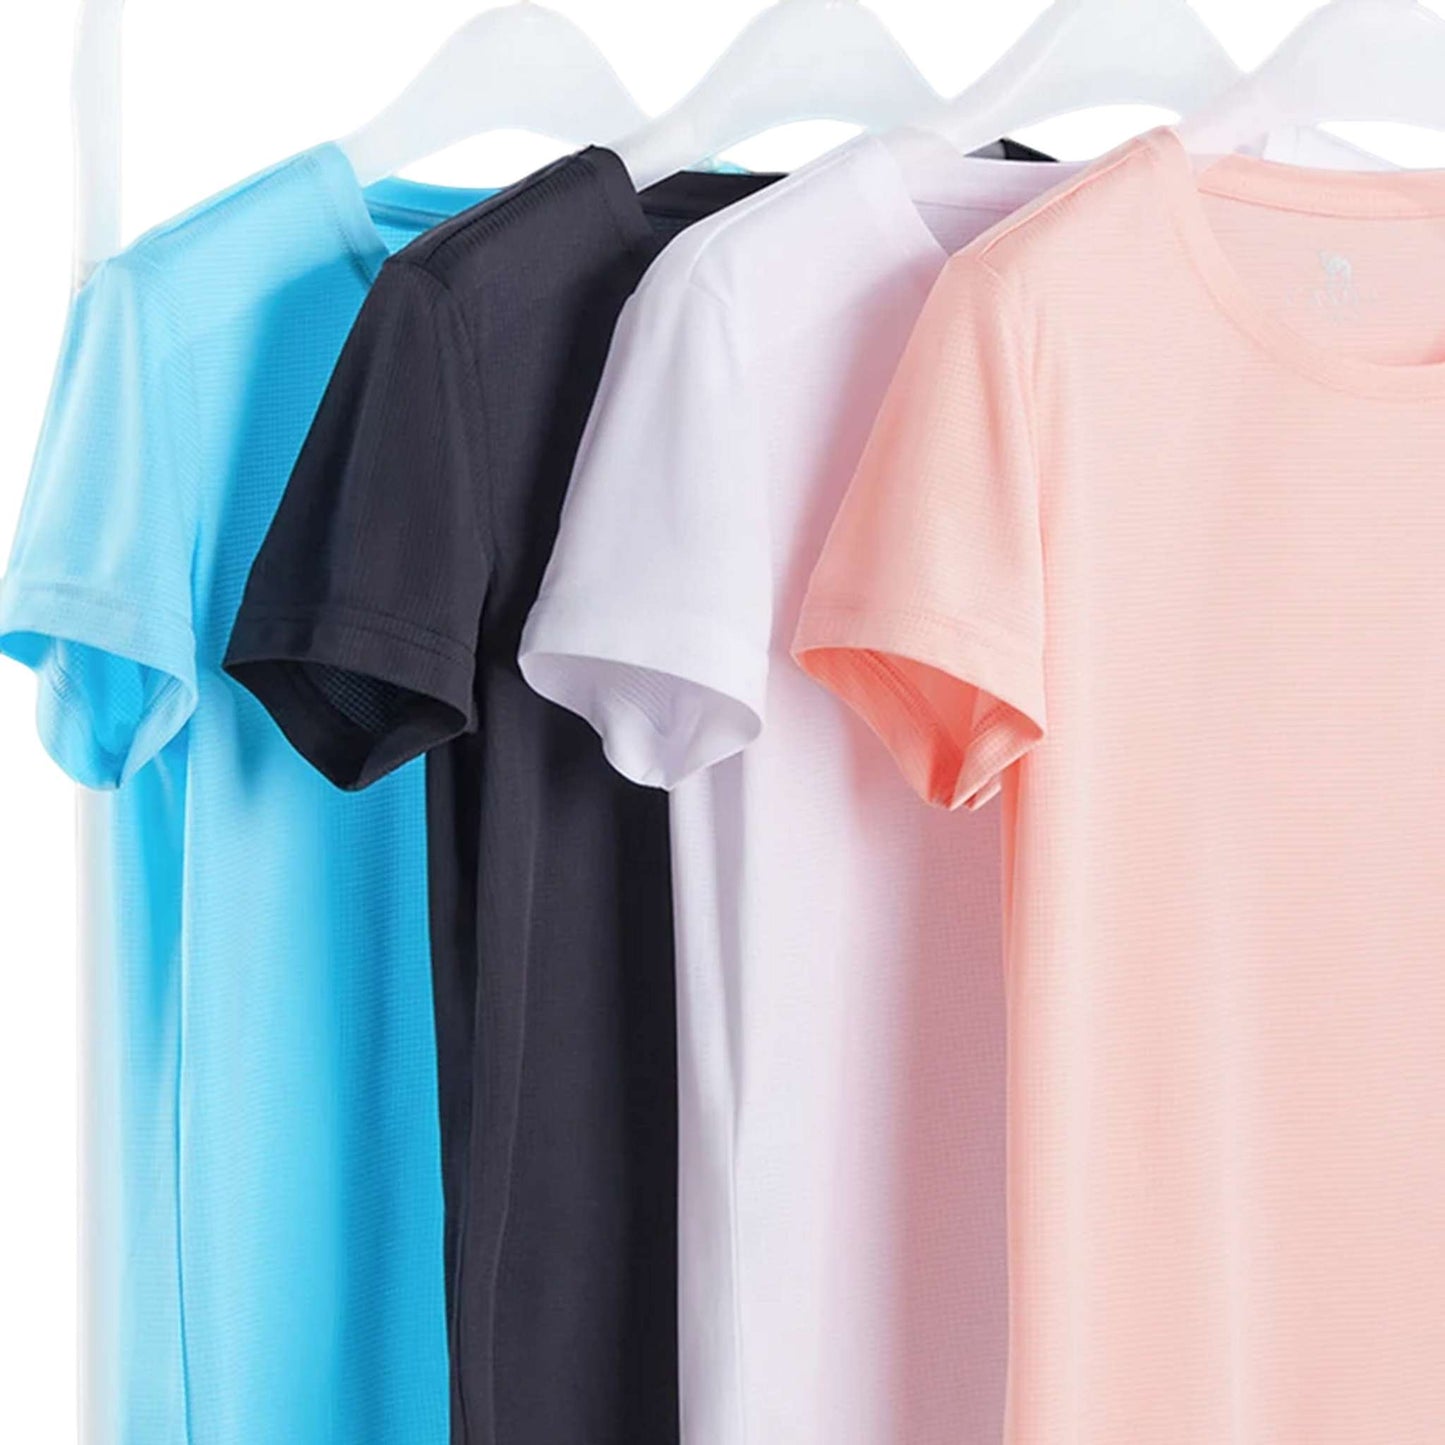 Women's Quick-Dry Outdoor Tee - Breathable, Lightweight Hiking & Running Top